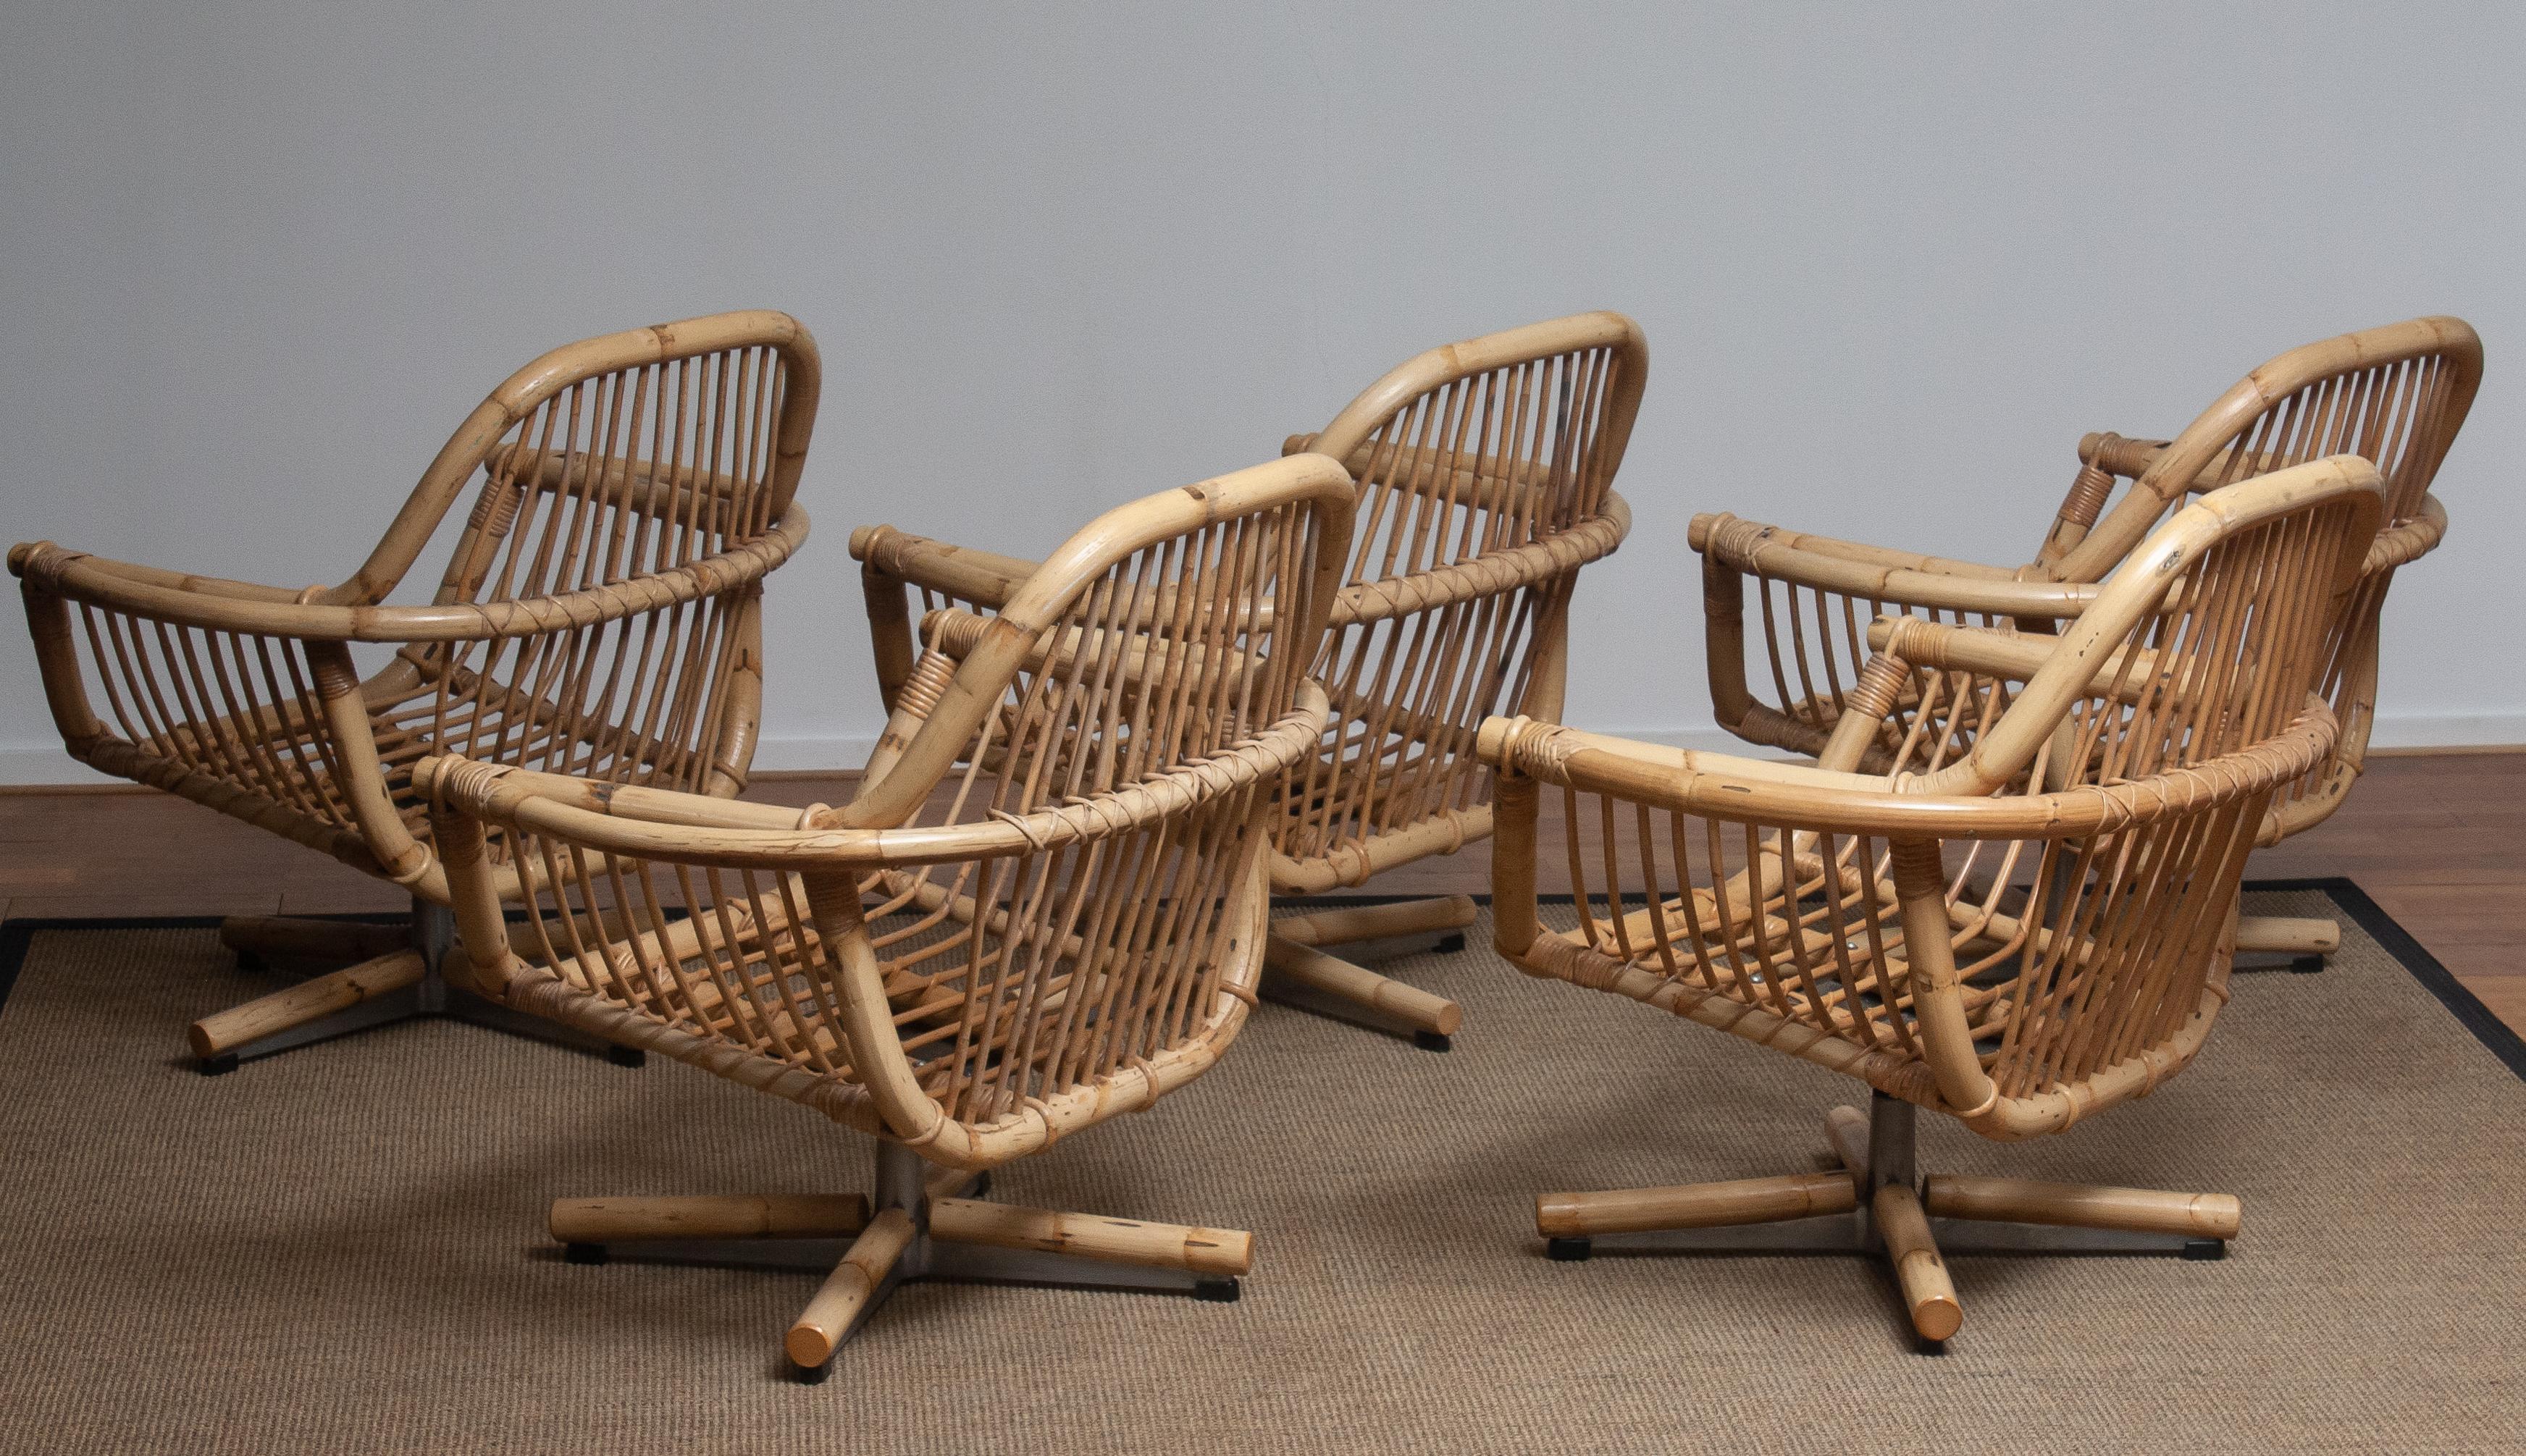 1960s Rattan Garden Set / Lounge Set Consist Five Swivel Chairs and Coffee Table 5